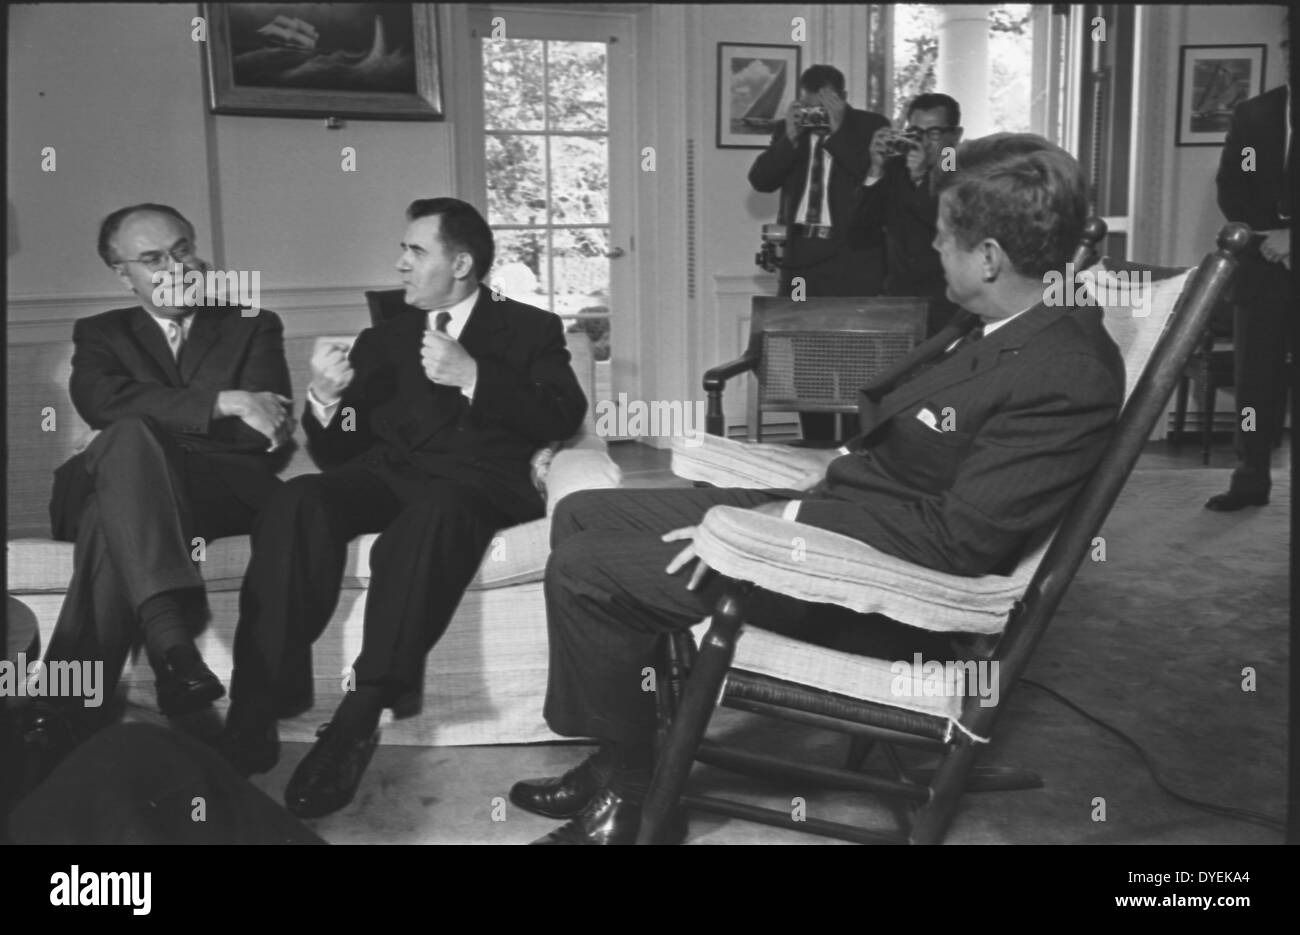 Left to right, Soviet ambassador to the USA, Anatoly F. Dobrynin and Soviet foreign minister Andrei Gromyko, talking with President john F Kennedy, who is seated in rocking chair, at the White House, Washington, D.C. 1962 Oct. 18. during the Cuban Missile Crisis Stock Photo